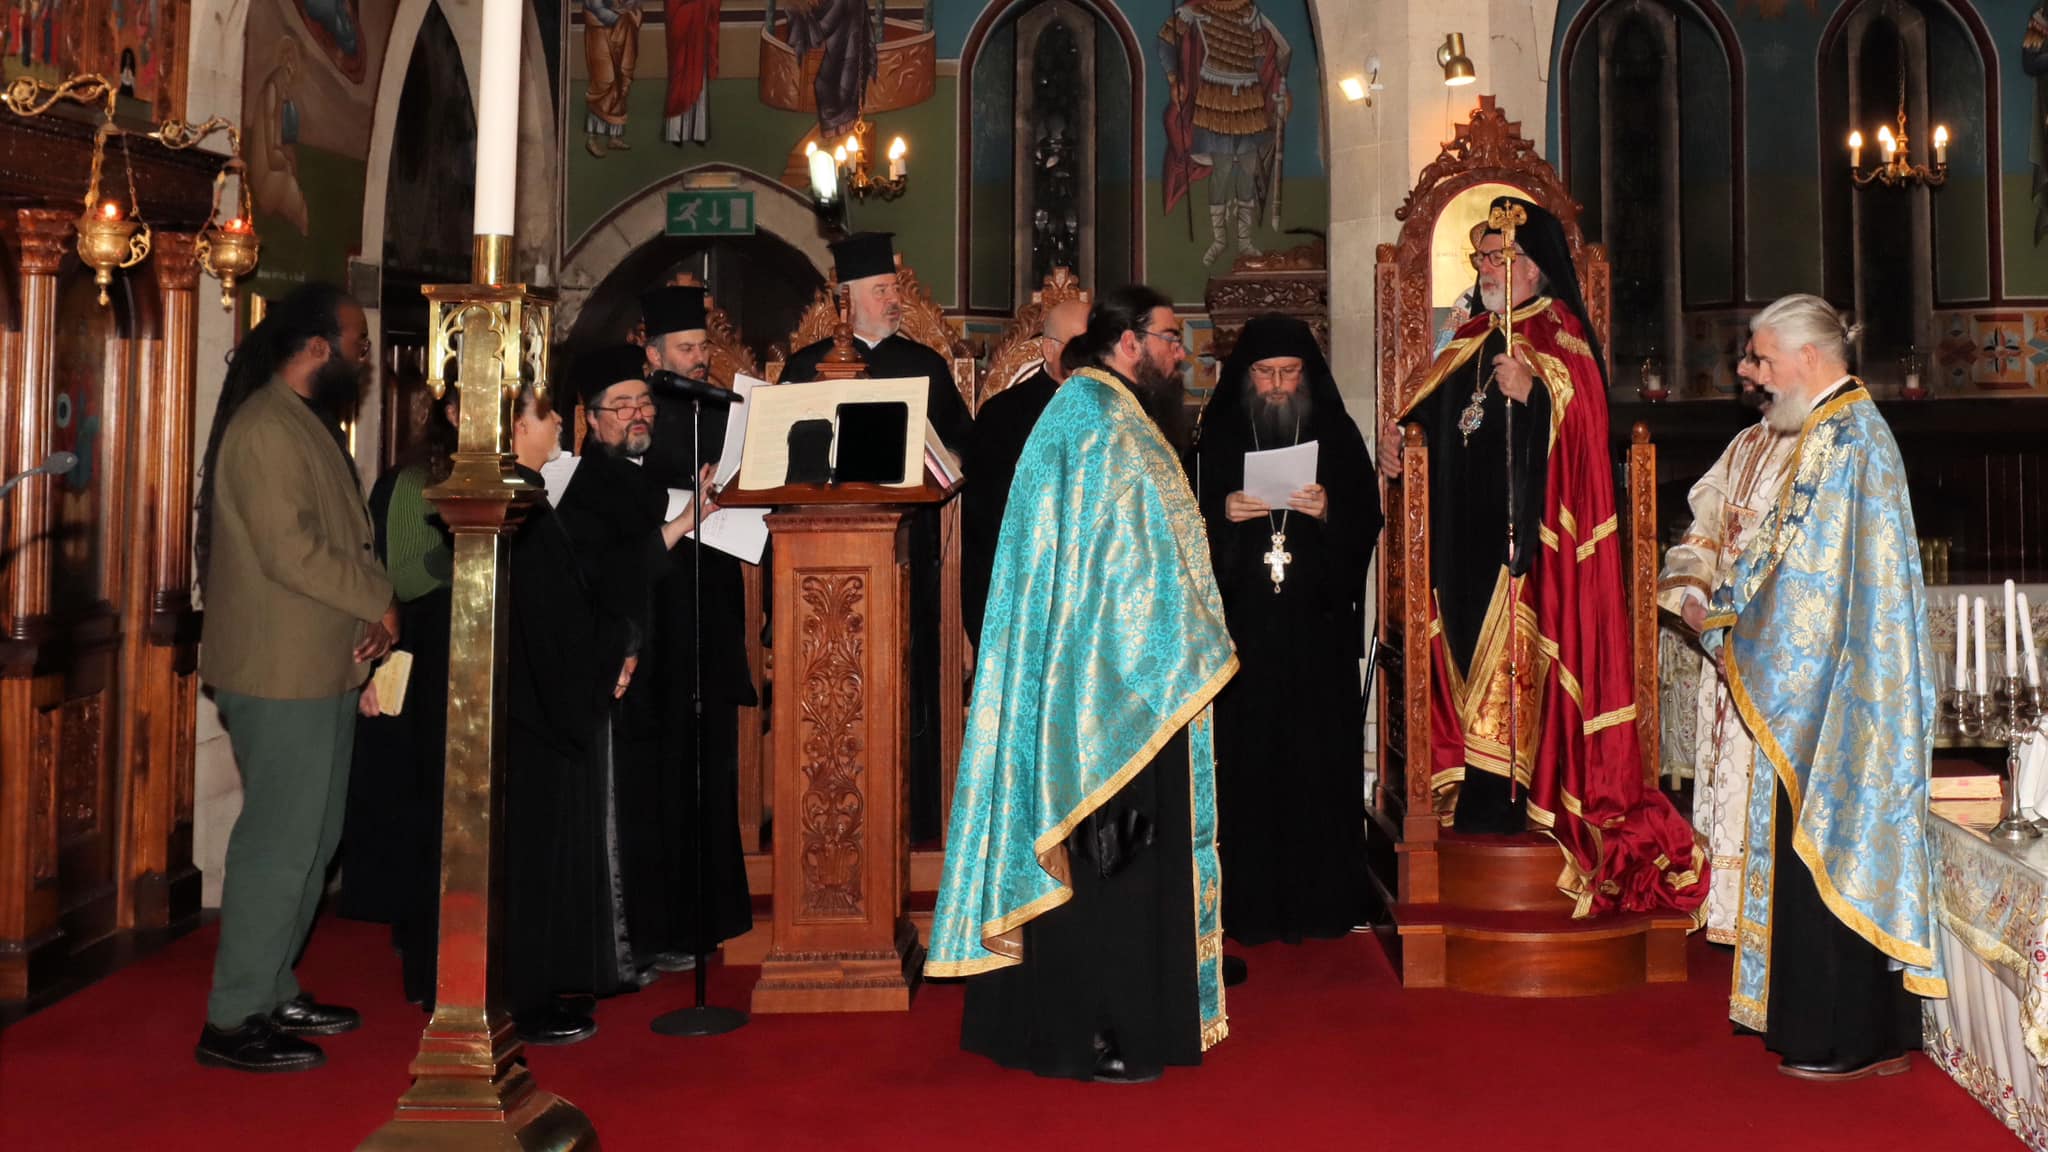 The Feast of the Three Hierarchs was celebrated with splendour in London